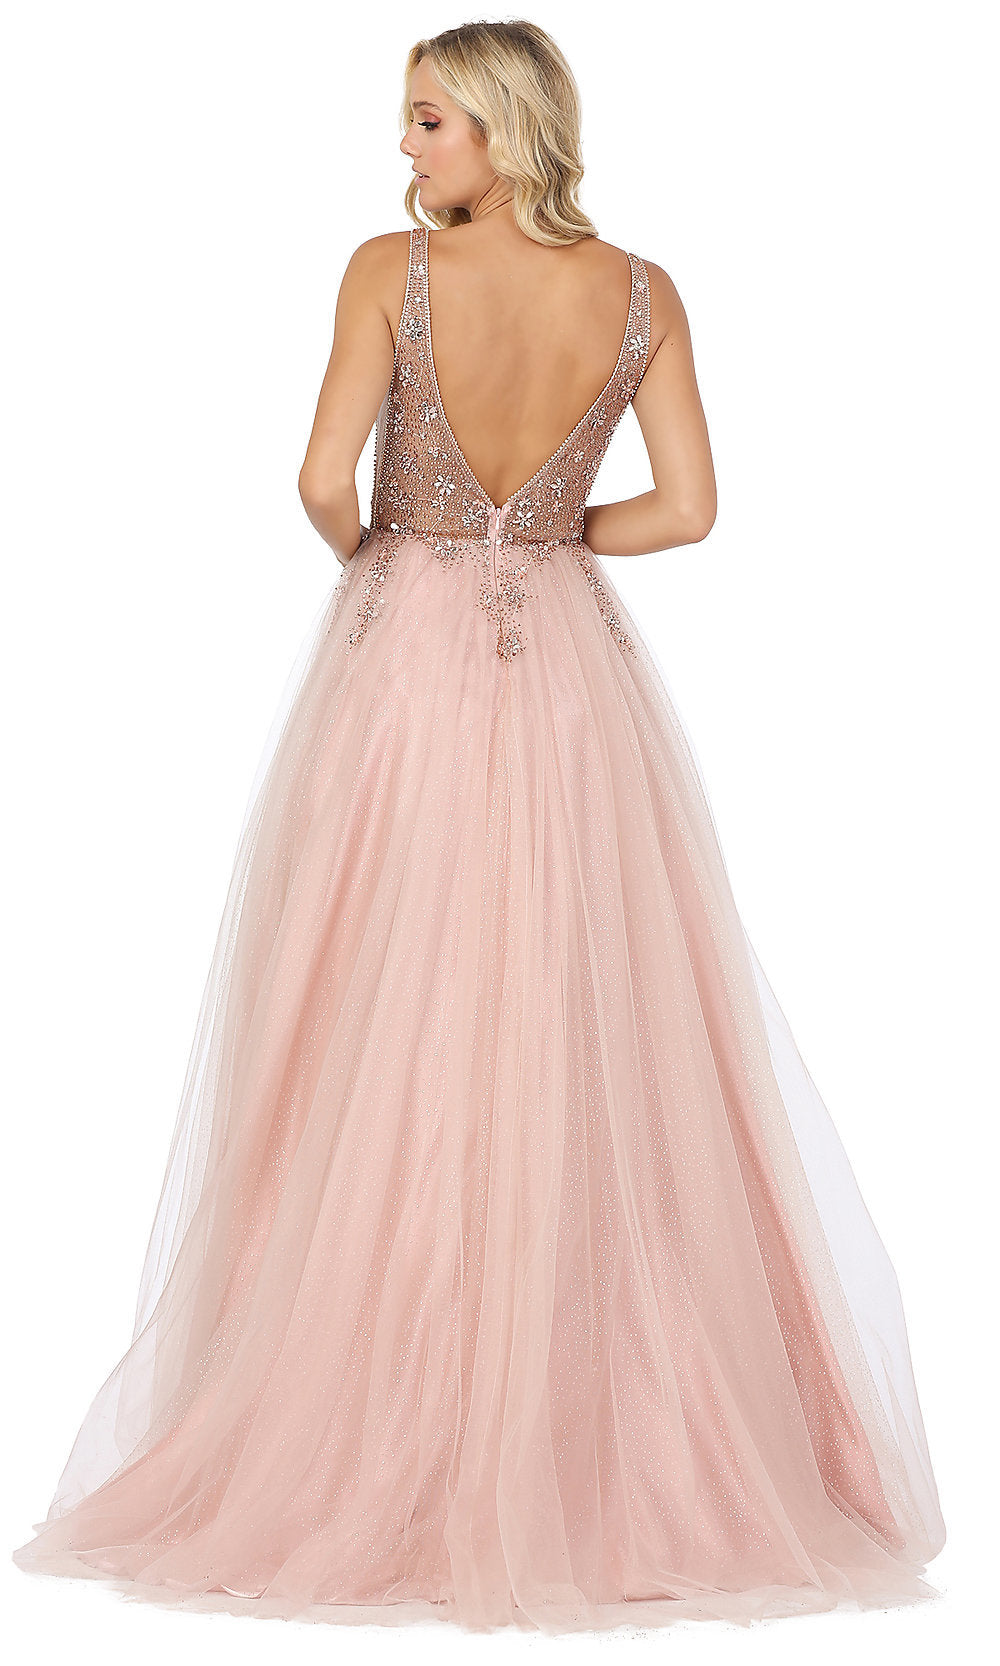 Sheer-Beaded-Bodice Ball-Gown-Style Prom Dress